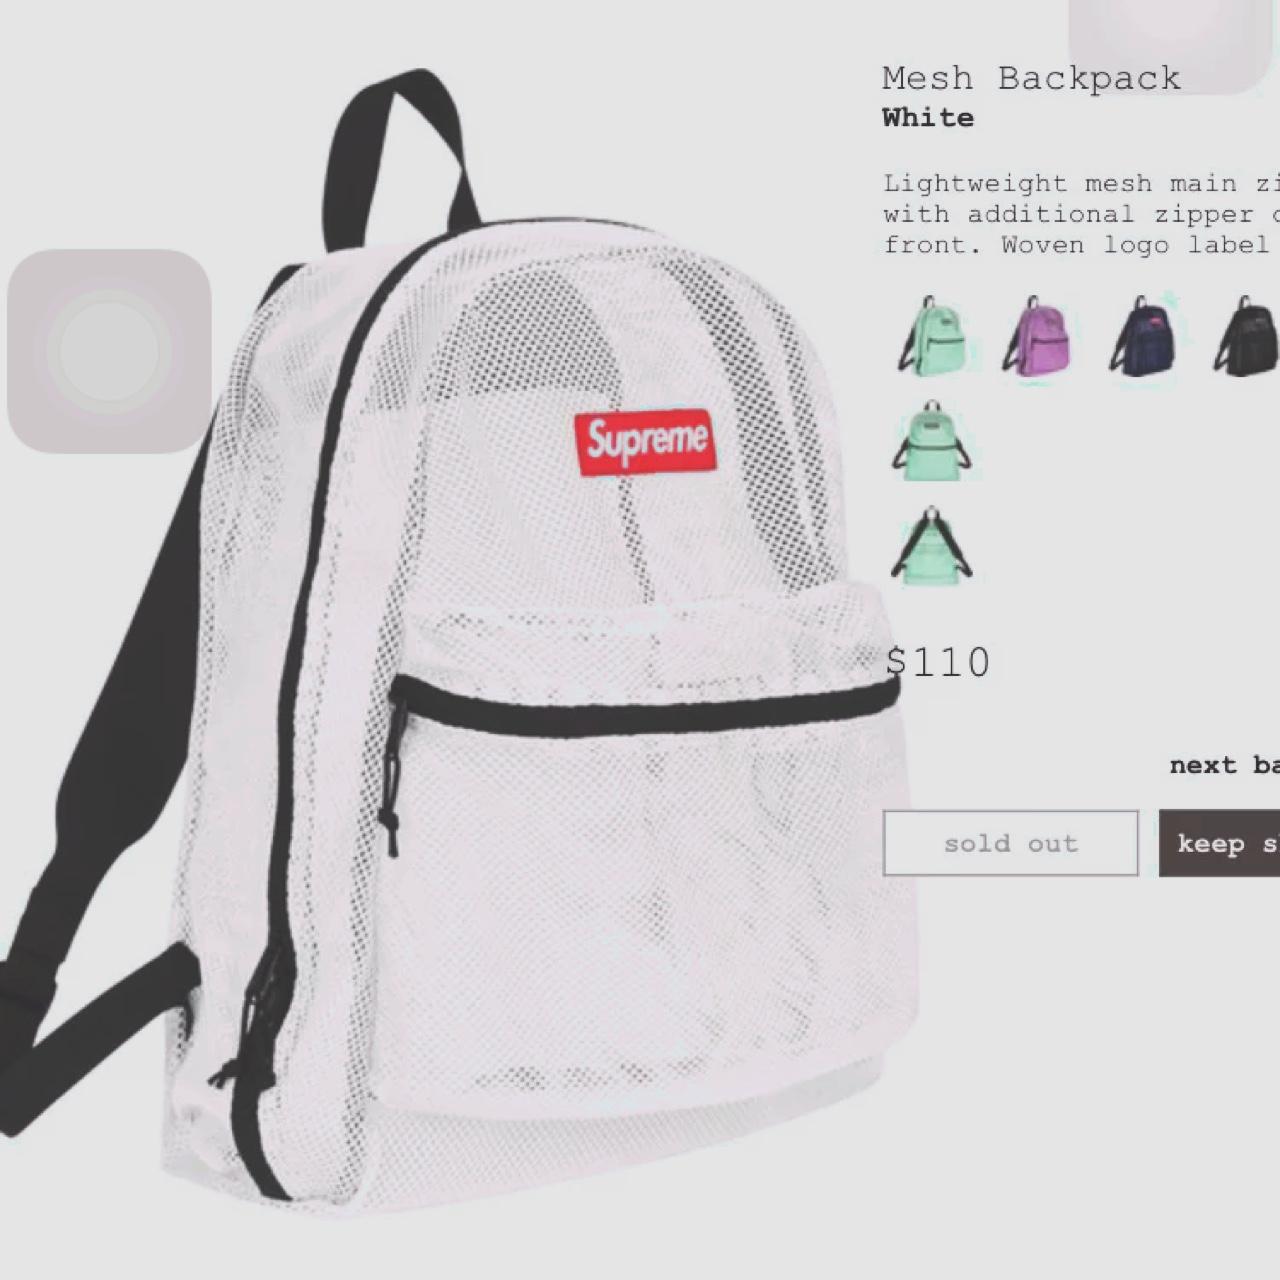 DS Supreme Mesh Backpack. From SS2016 drop 04/28